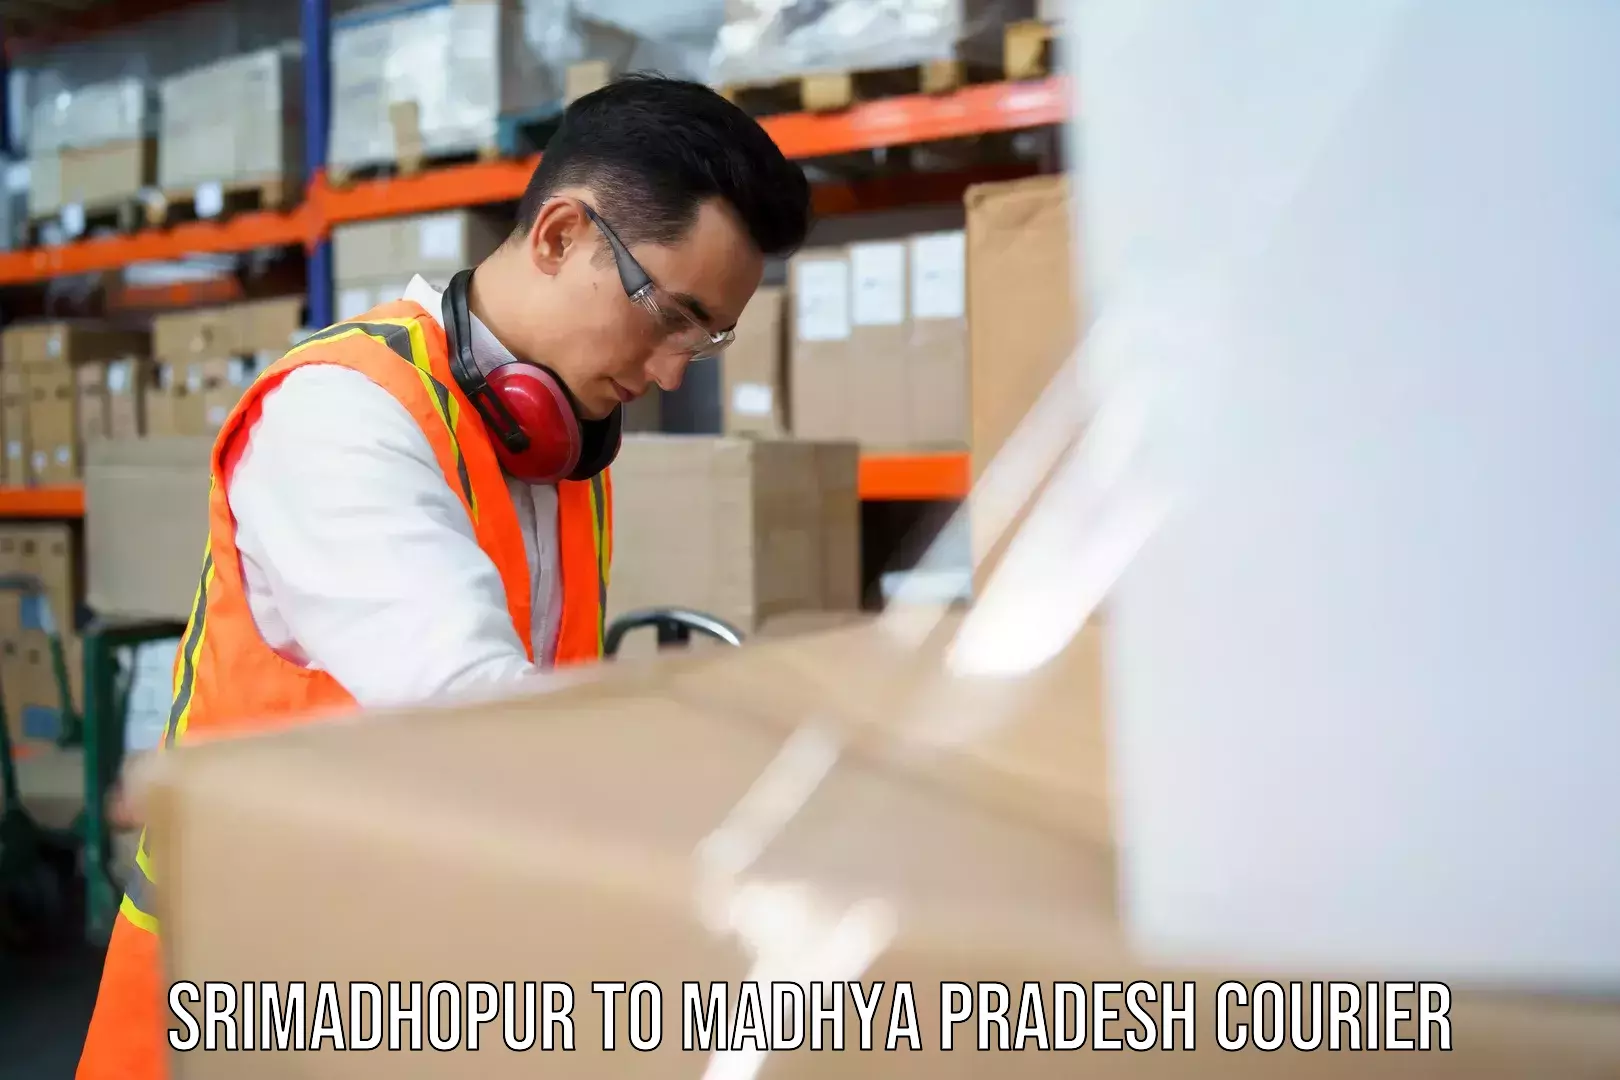 Quality courier partnerships Srimadhopur to Pithampur